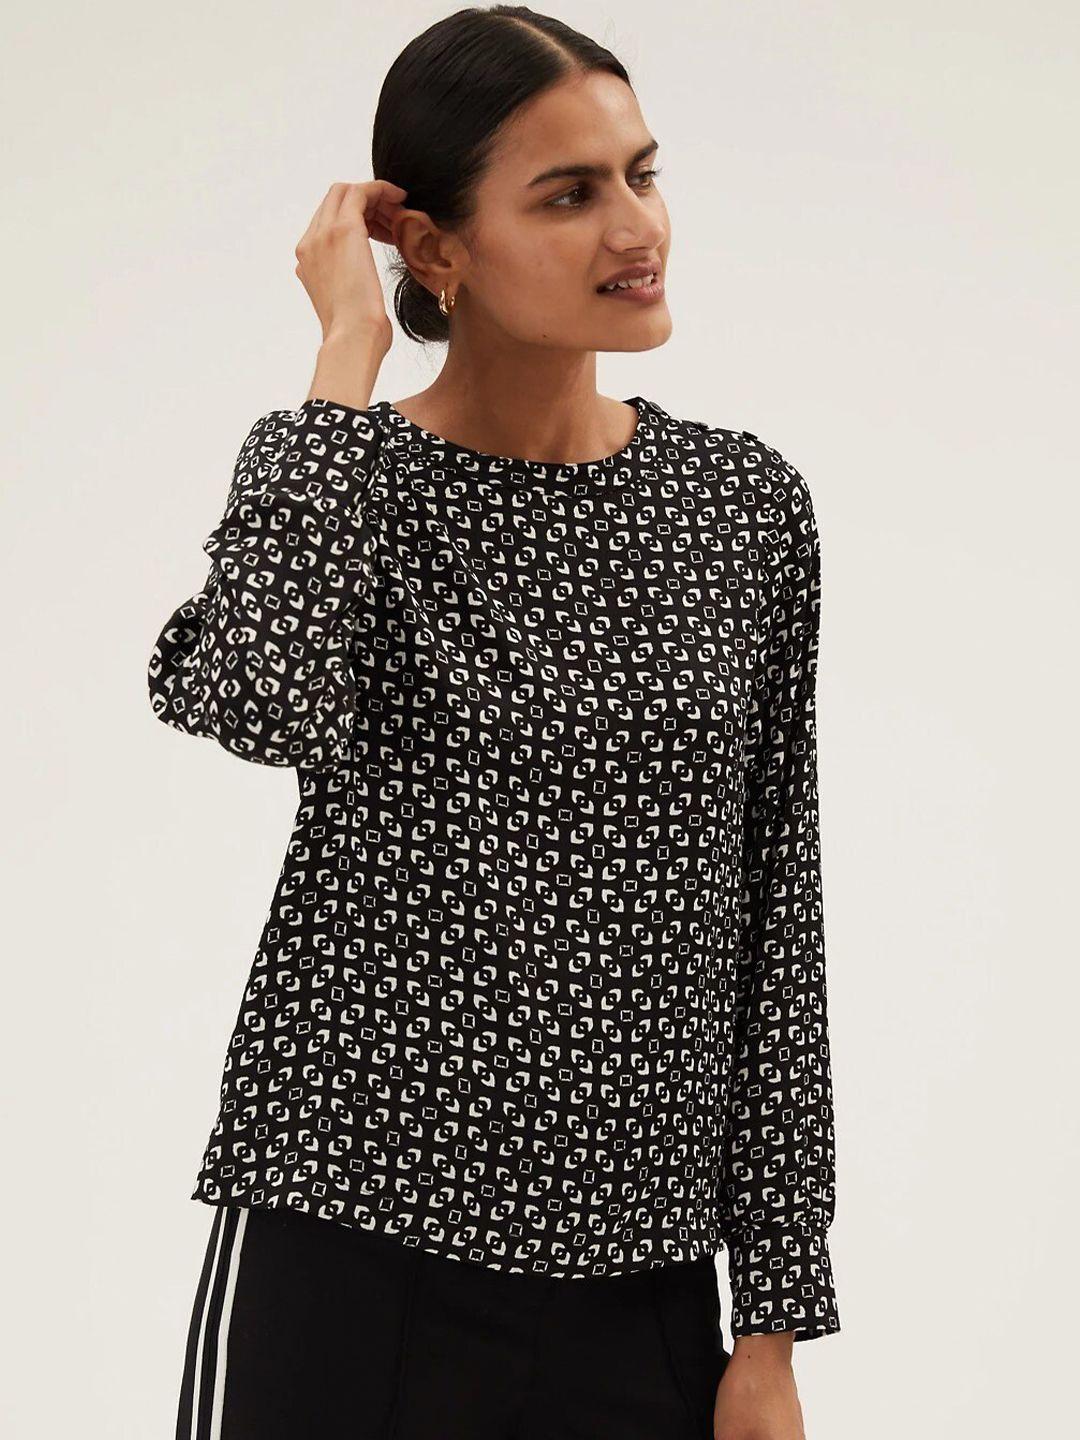 marks & spencer geometric print styled back top